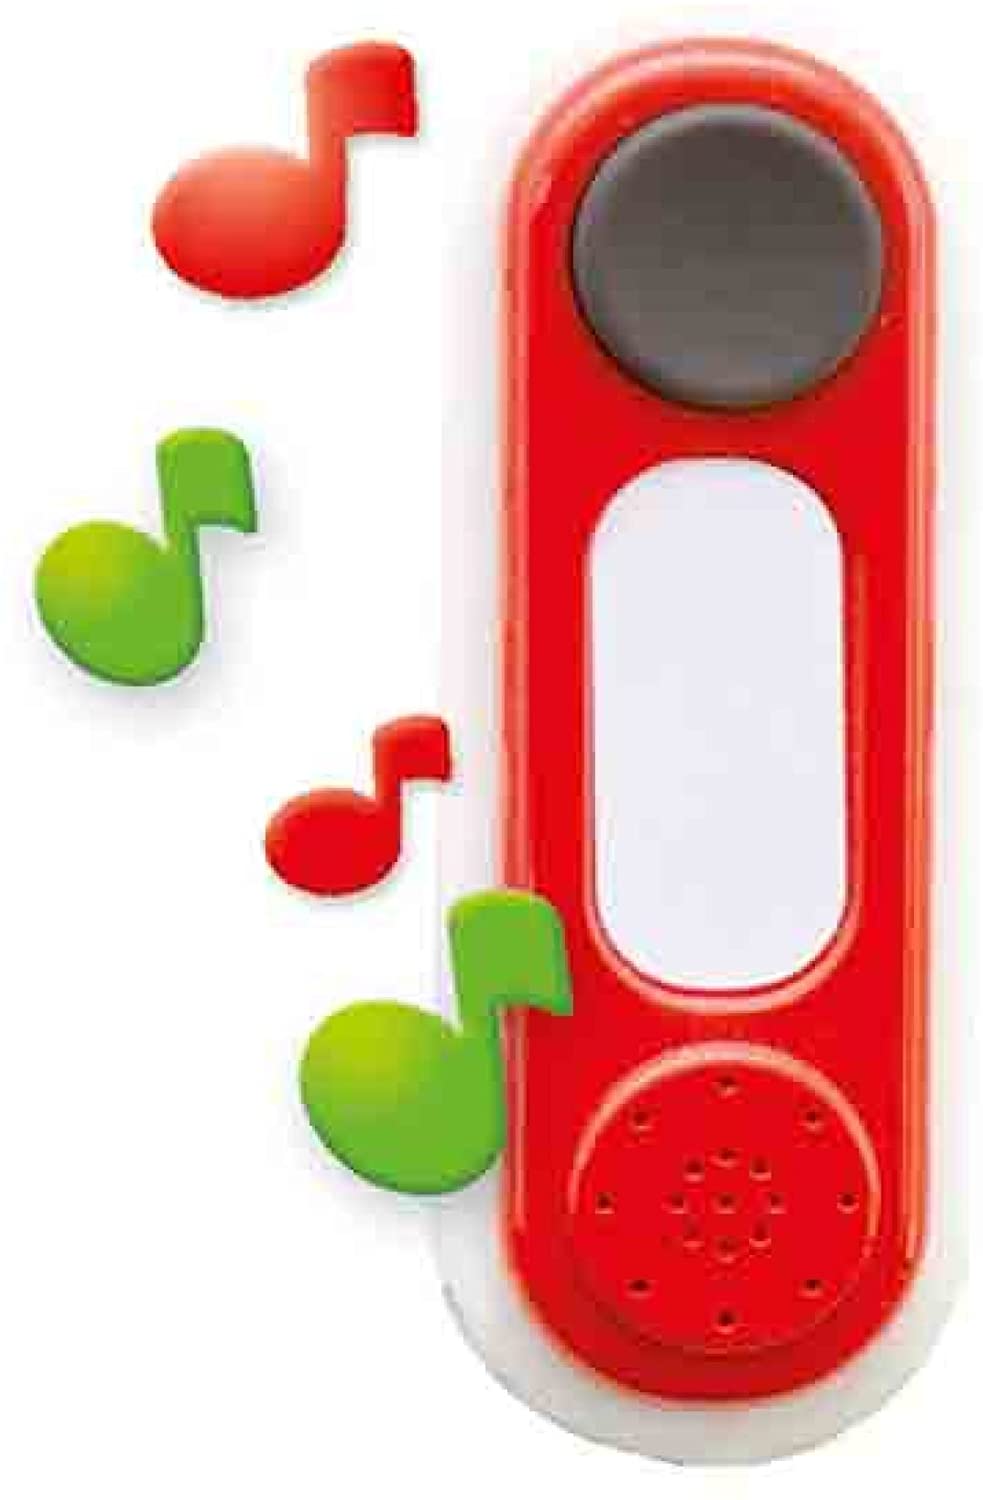 Smoby 810900 Electronic Doorbell Accessory for Playhouse, Red Standard